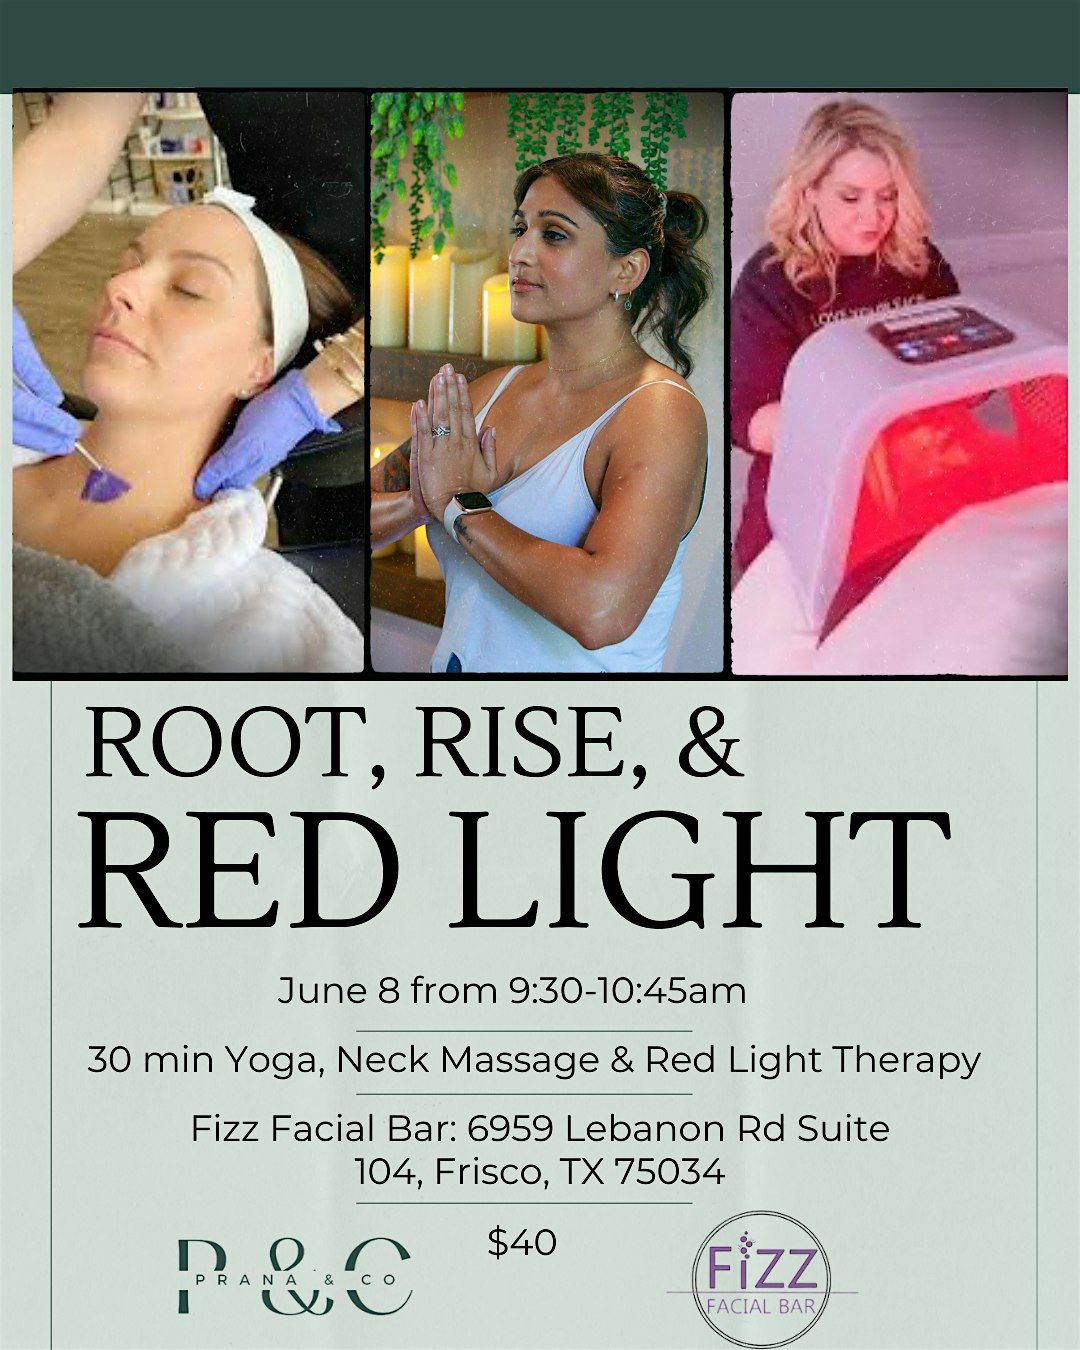 Root, Rise, & Red Light